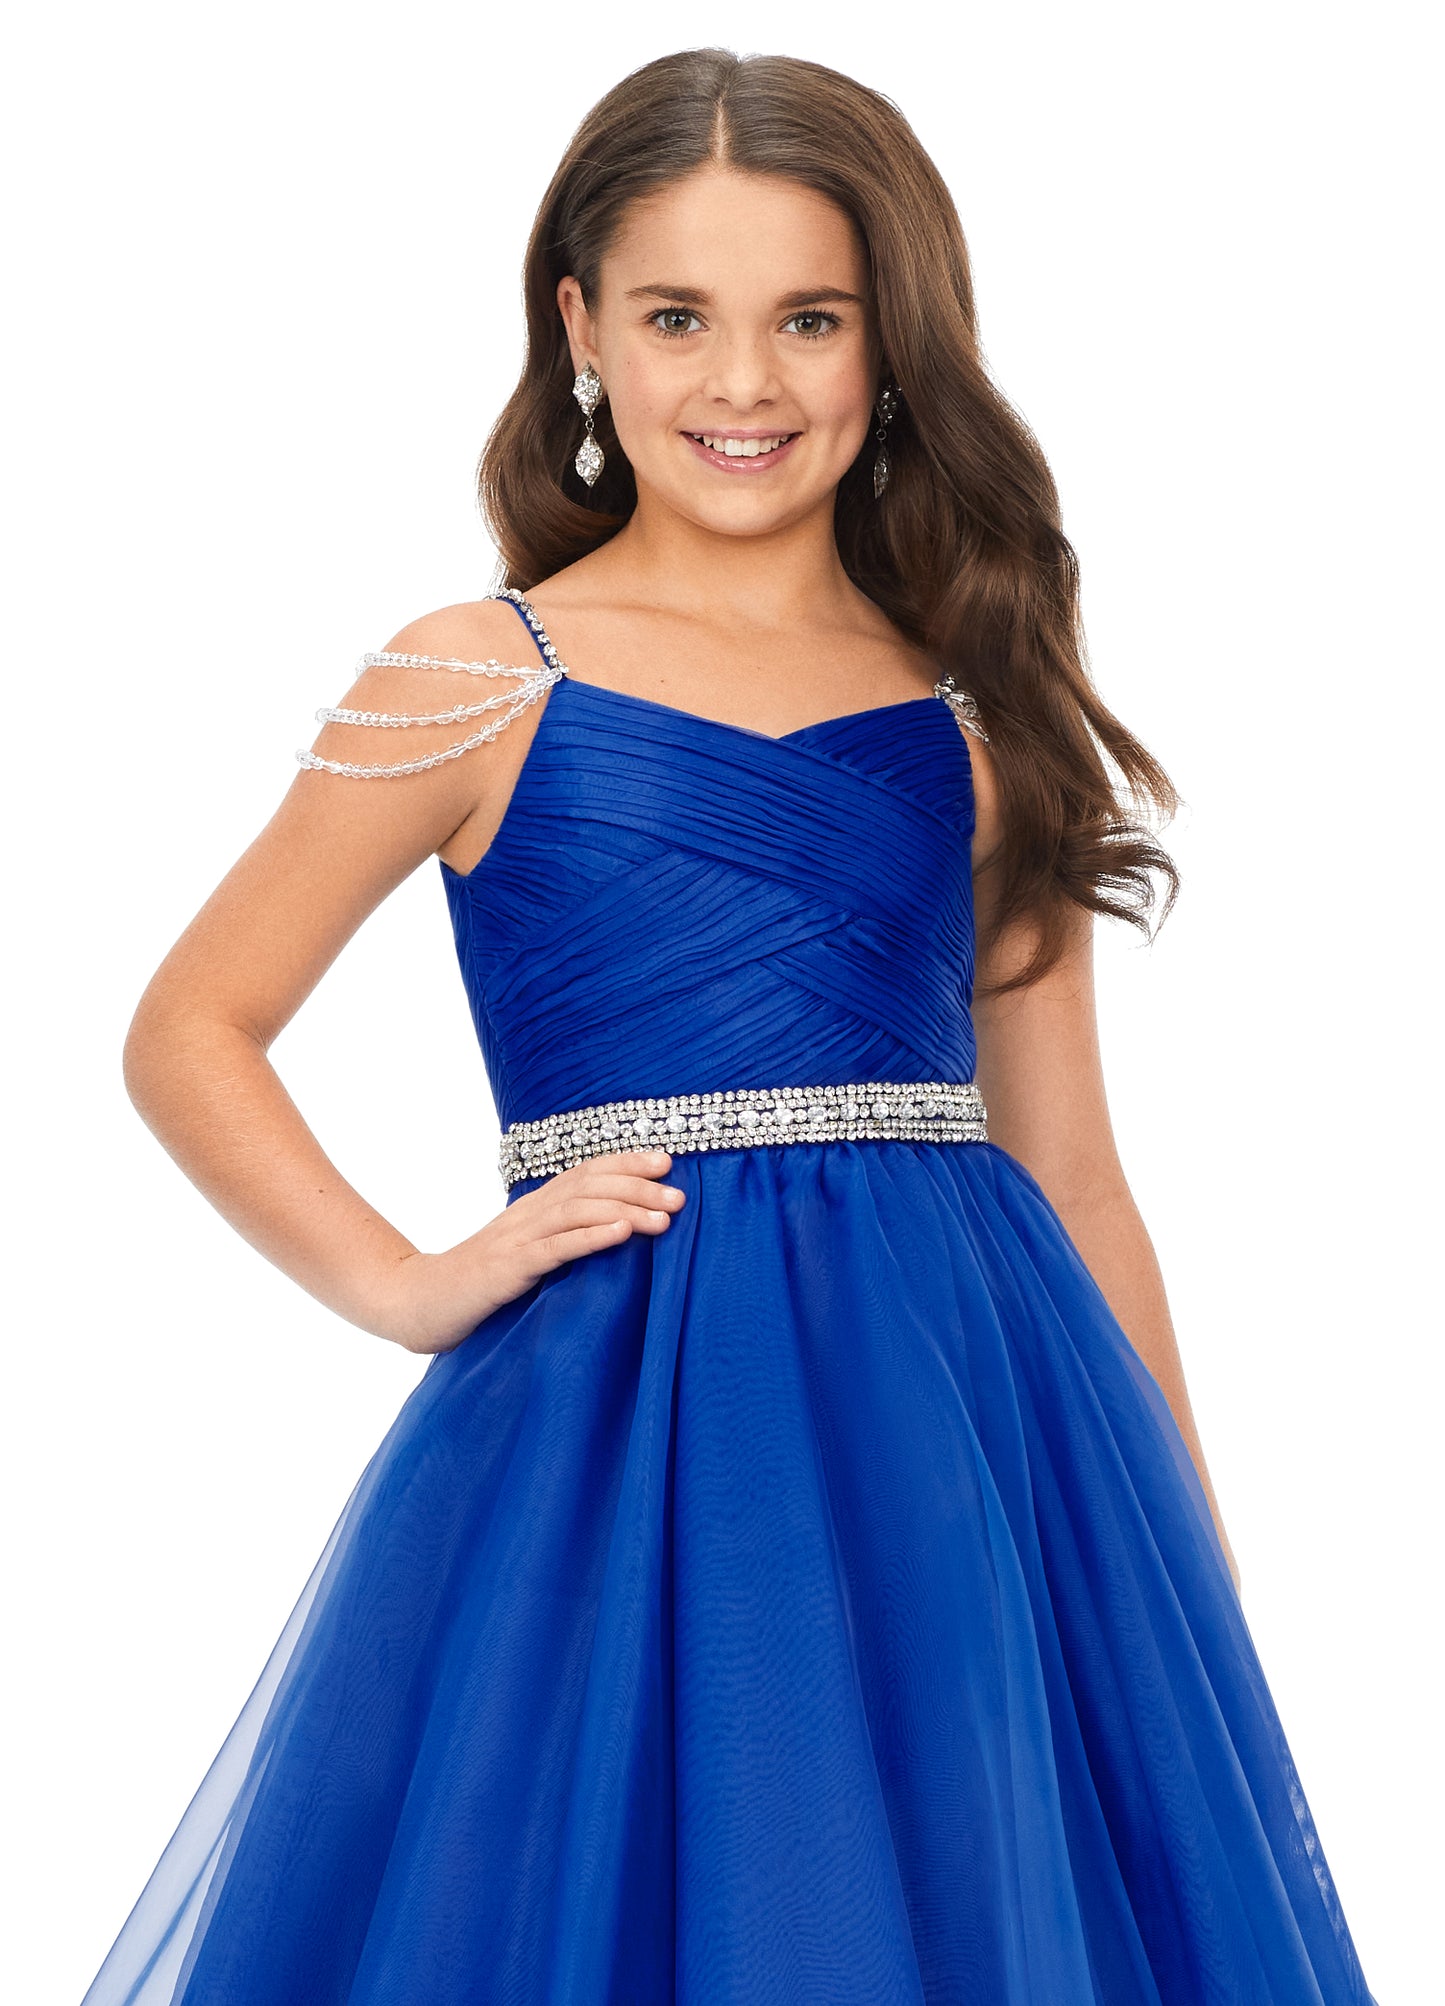 Ashley Lauren Kids 8170 Girls Organza Pageant Dress Ball Gown with Beaded Details